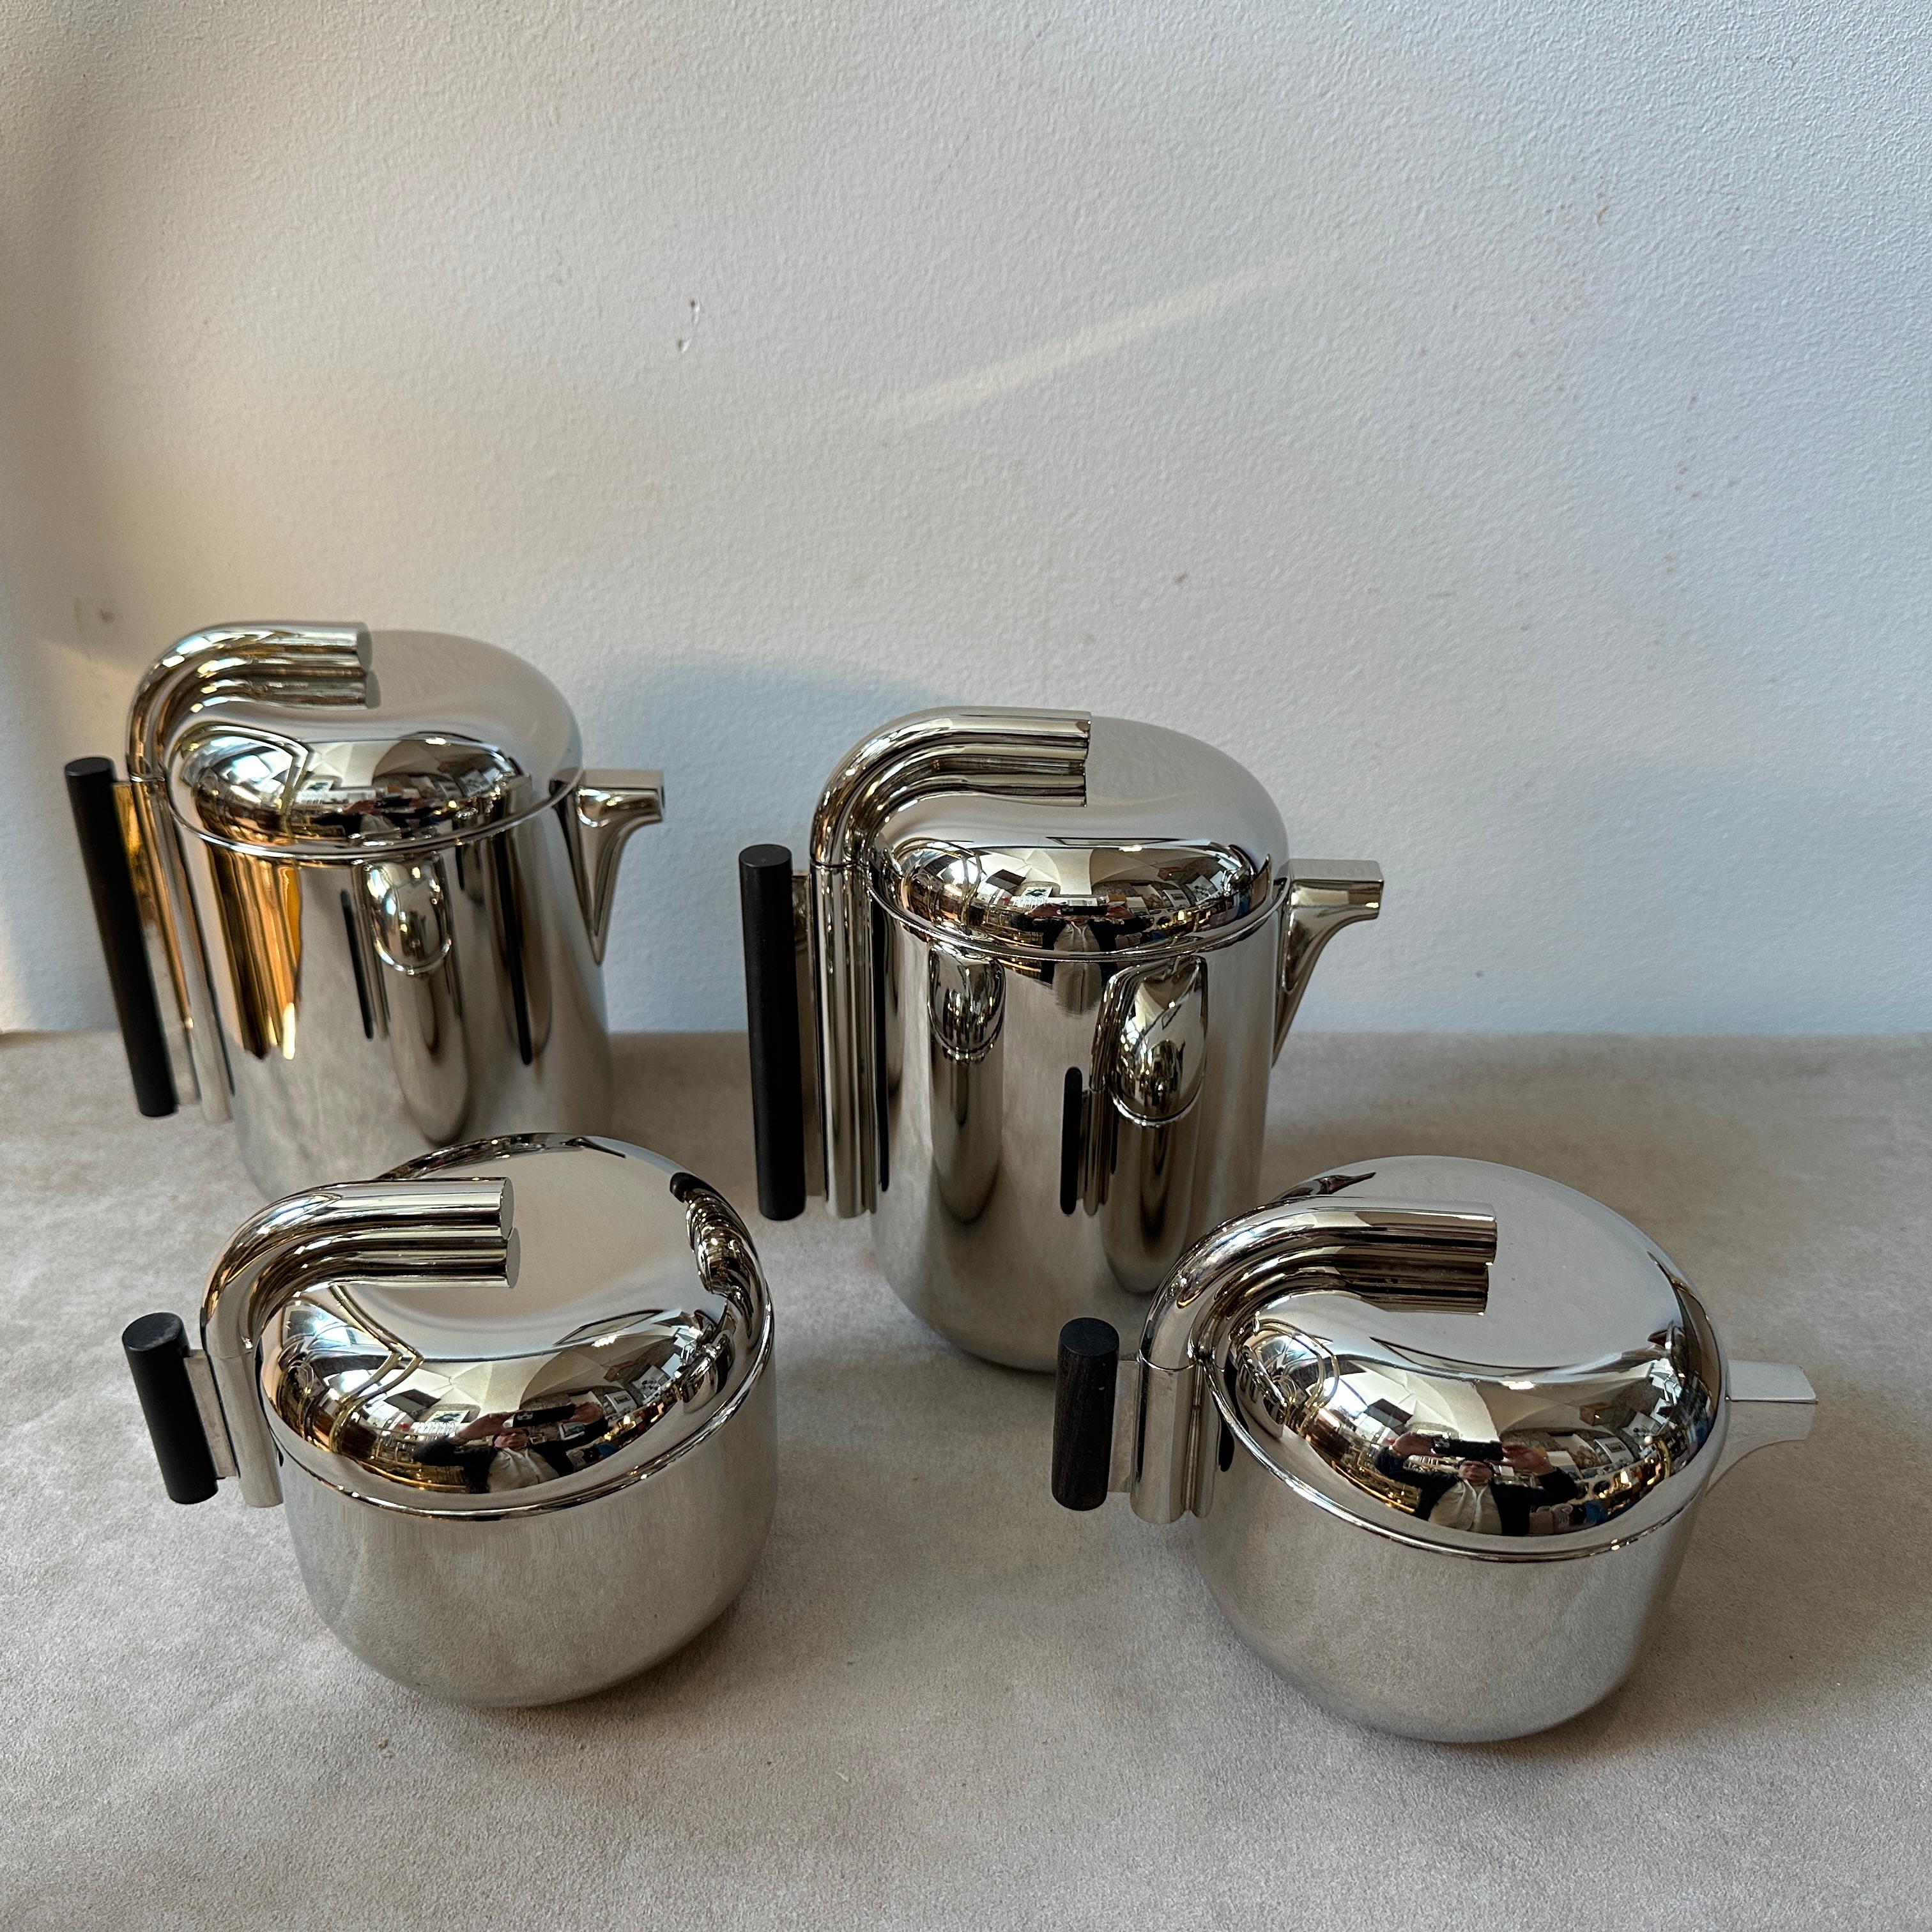 1960s Silver Plated Tea and Coffee Set Designed by G. Coarezza for Mam Milano For Sale 2